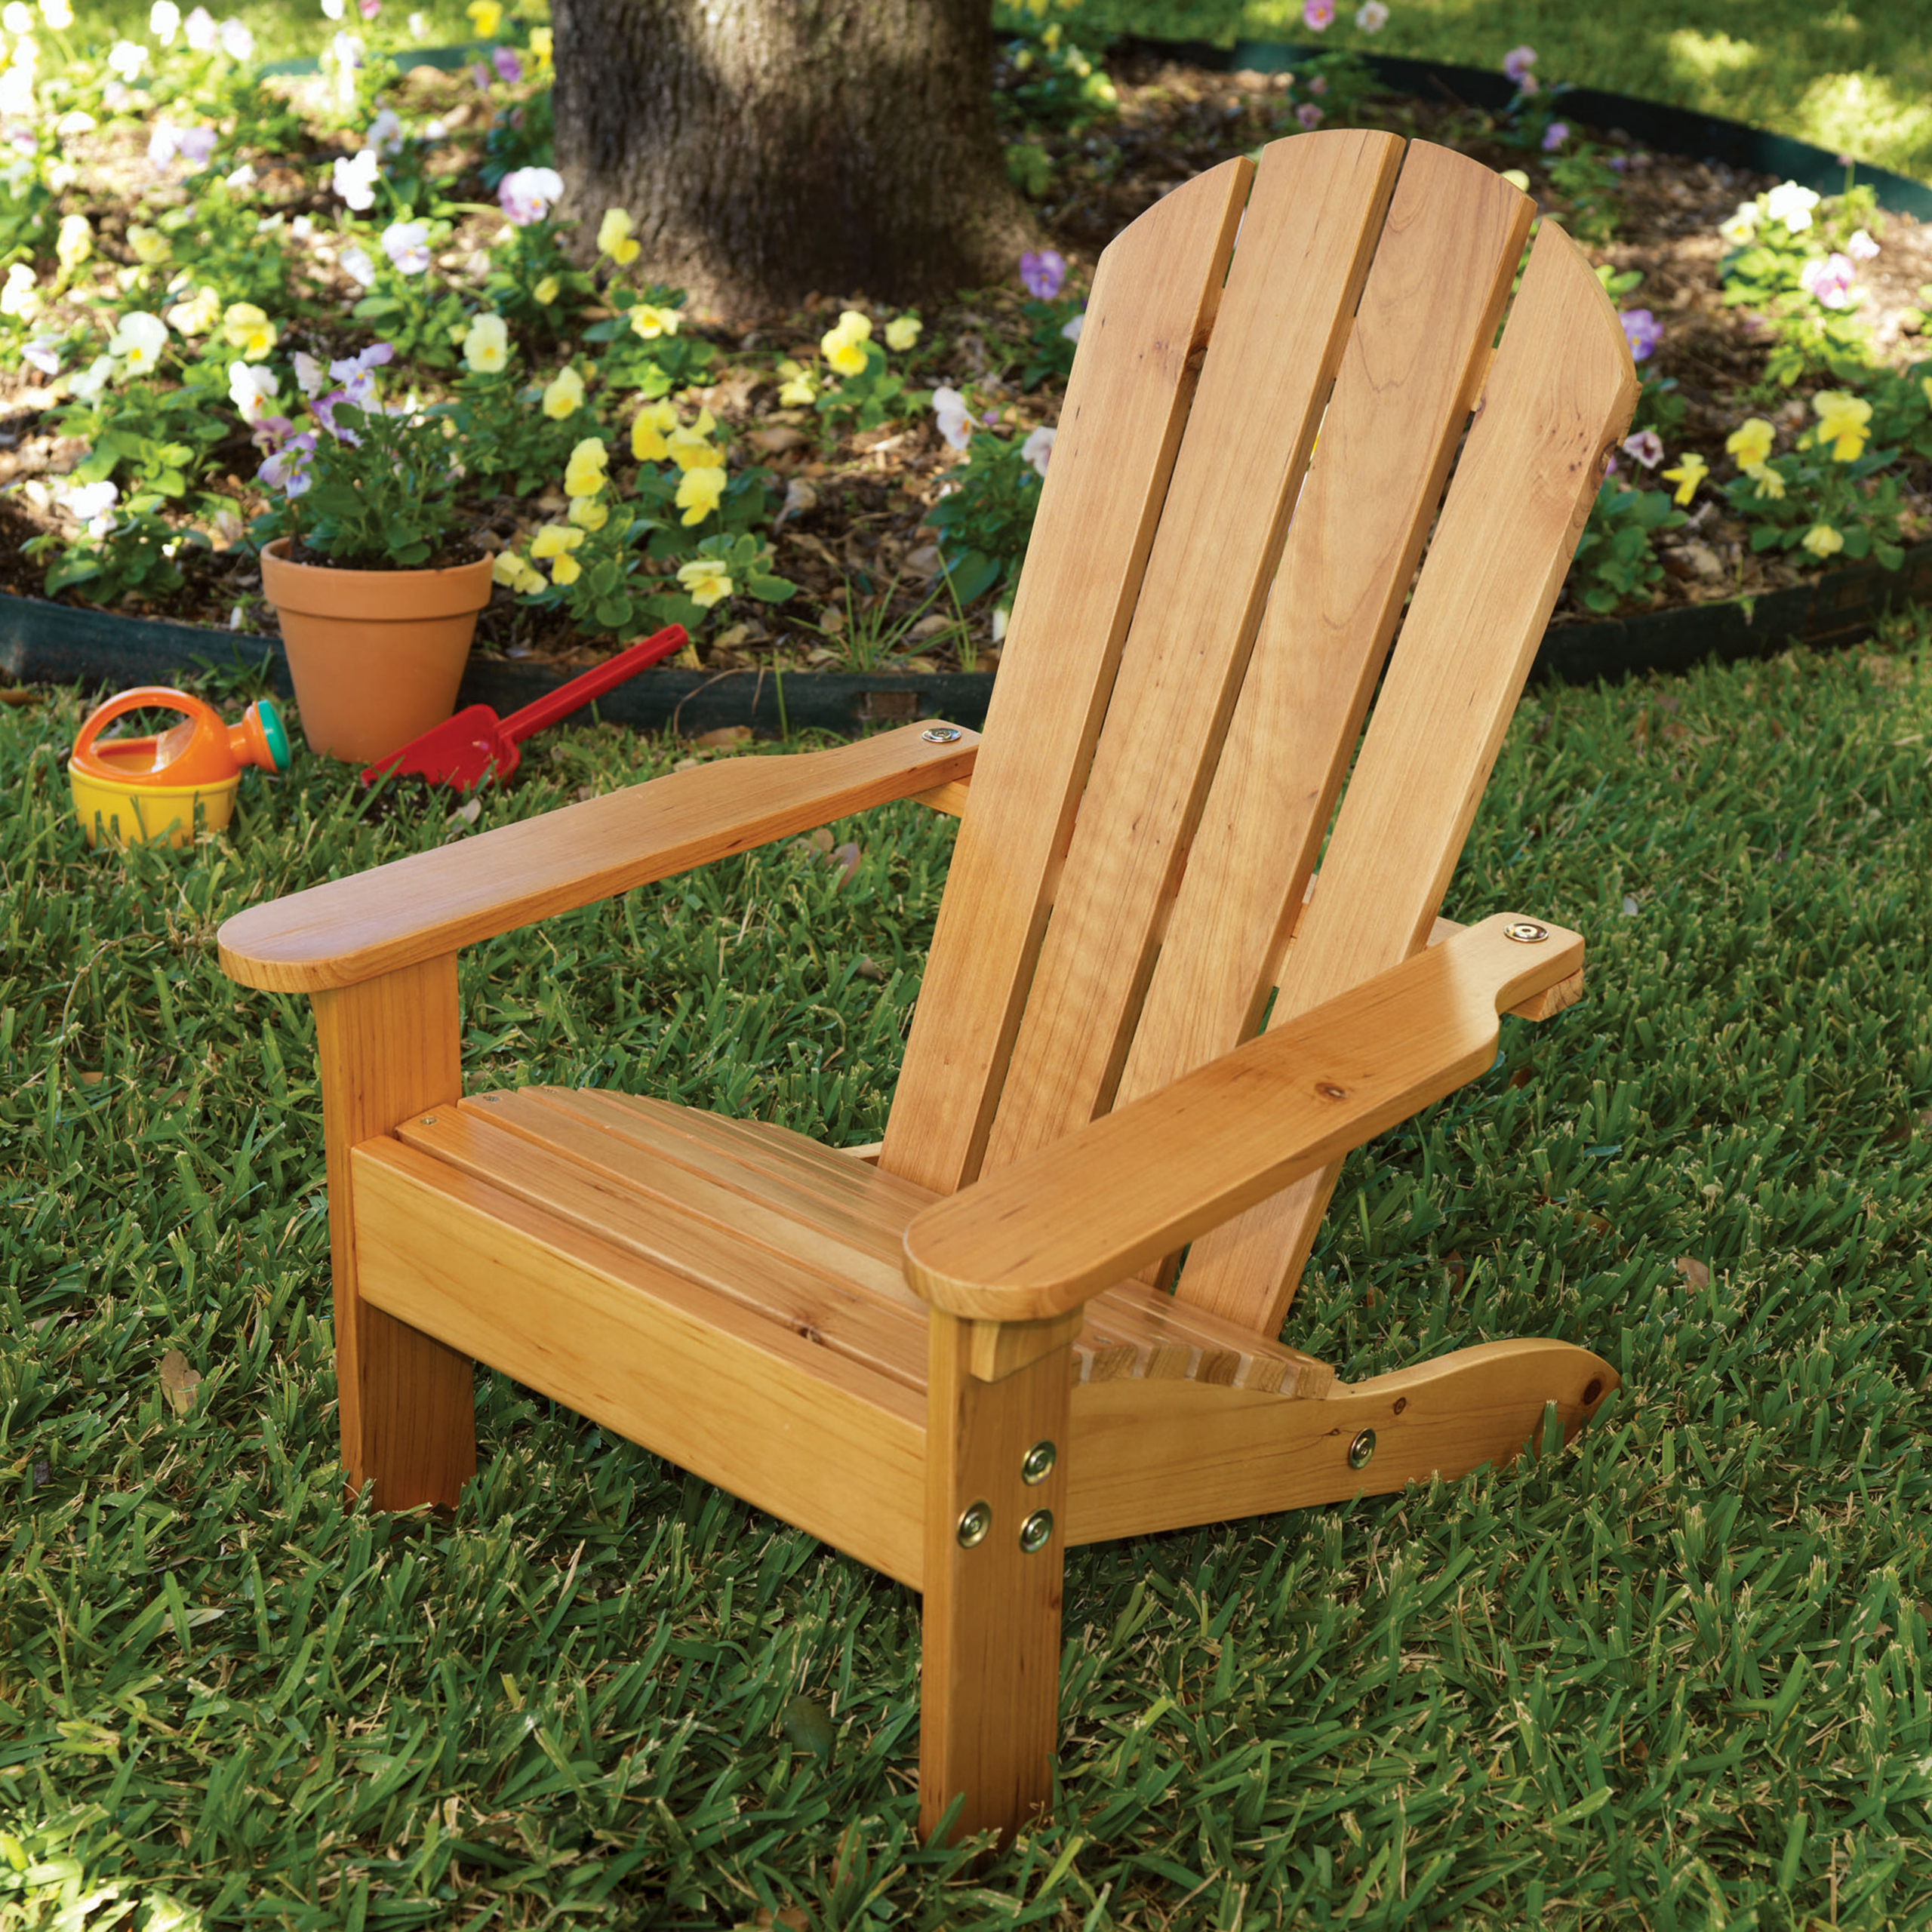 Love this honey personalized adirondack chair by kidkraft on zulily